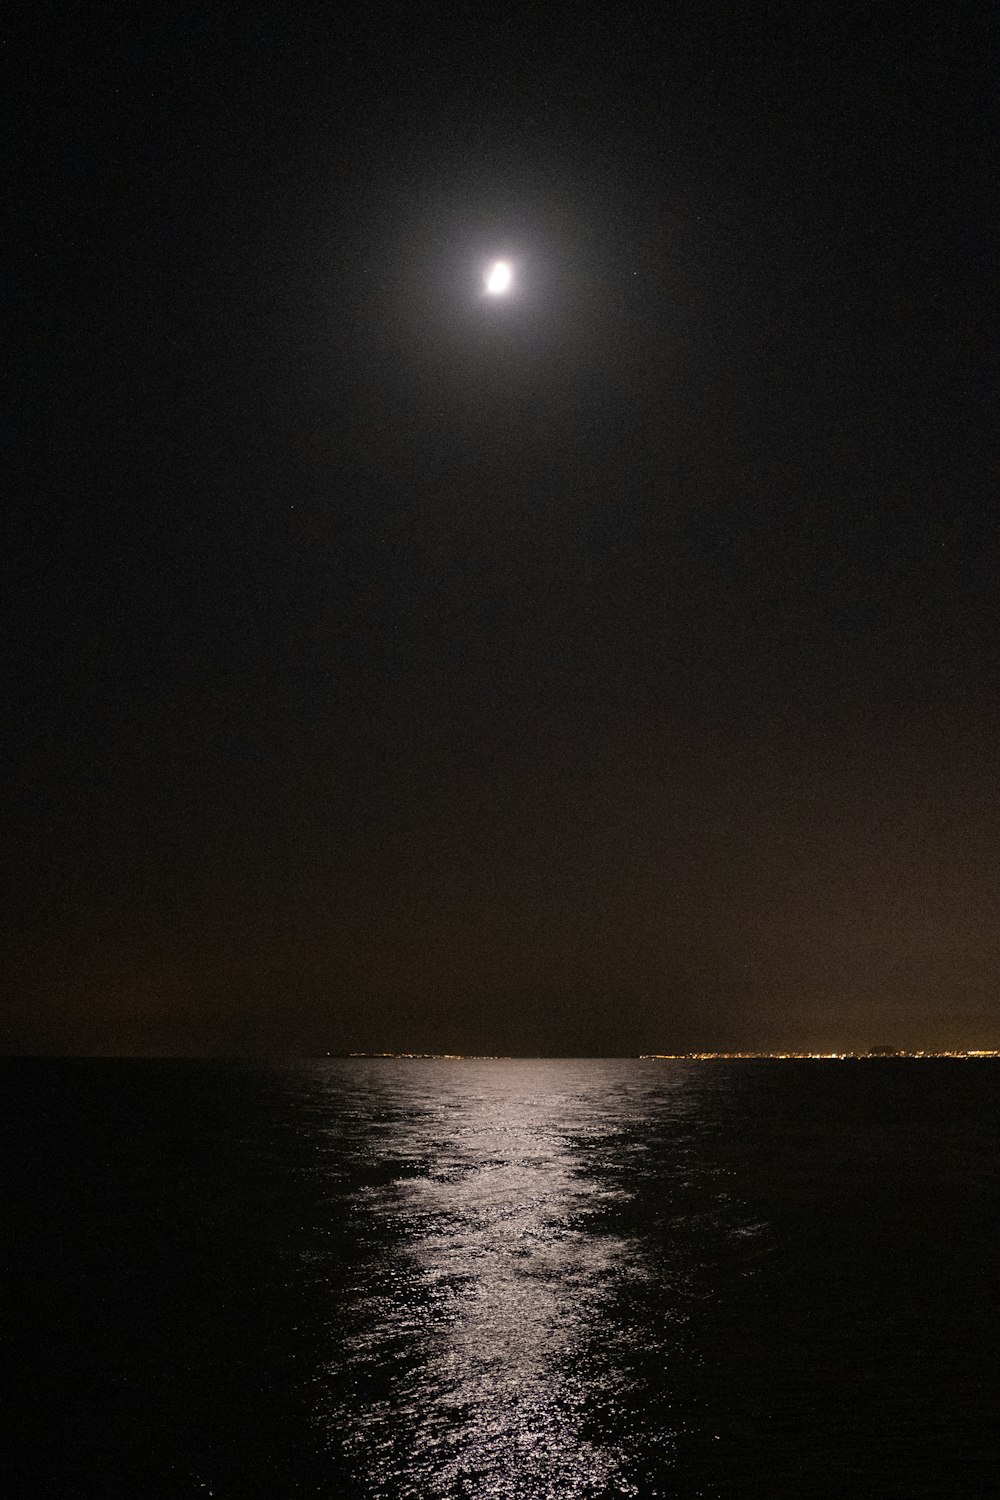 a full moon is seen over the ocean at night